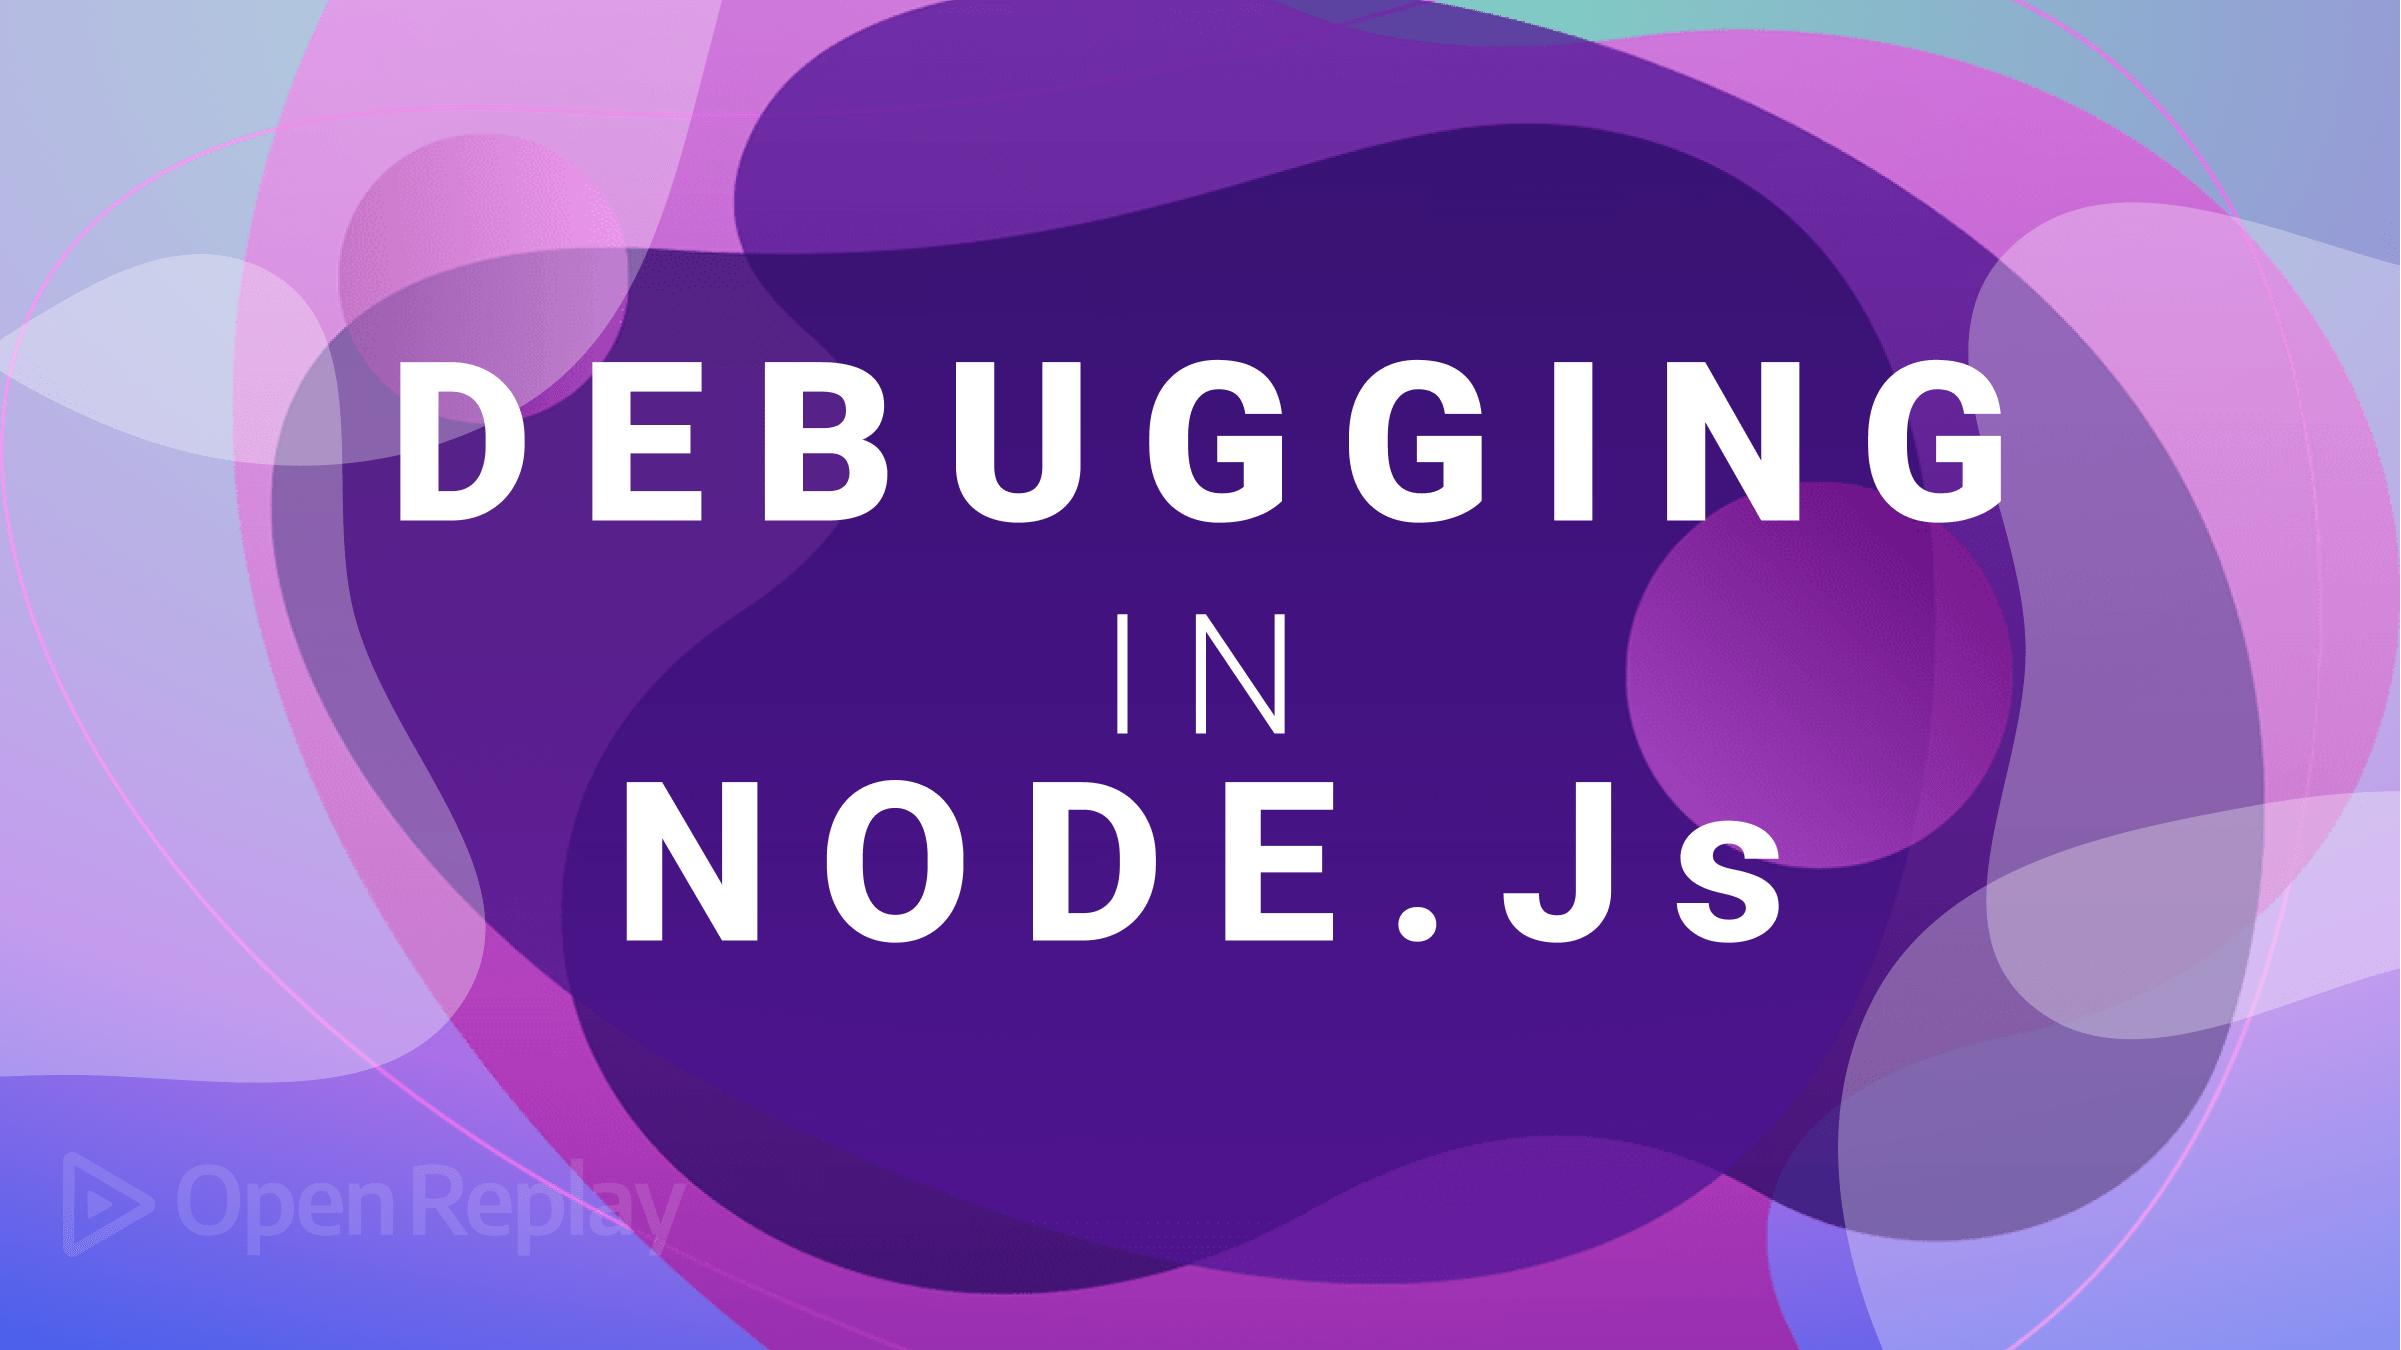 An introduction to debugging in Node.js